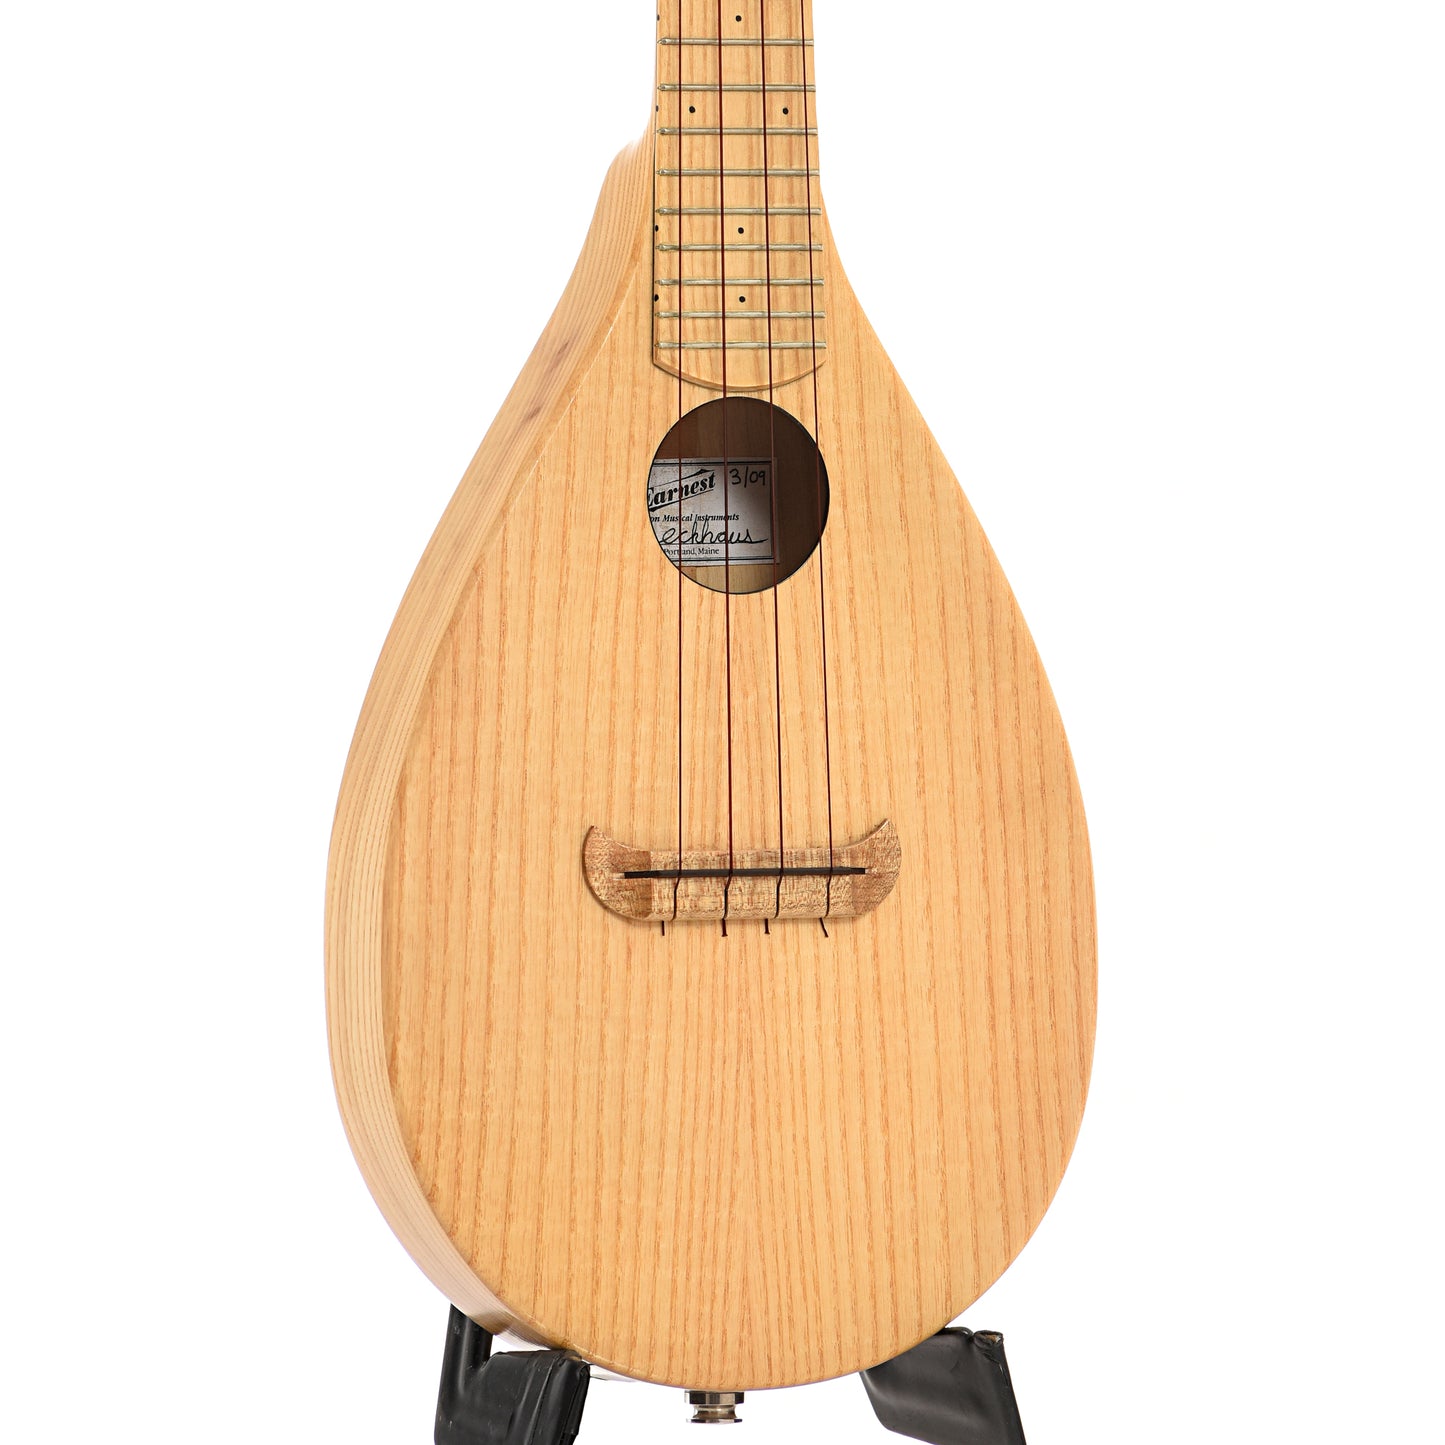 Front and side of Earnest Tenor Paddlelele